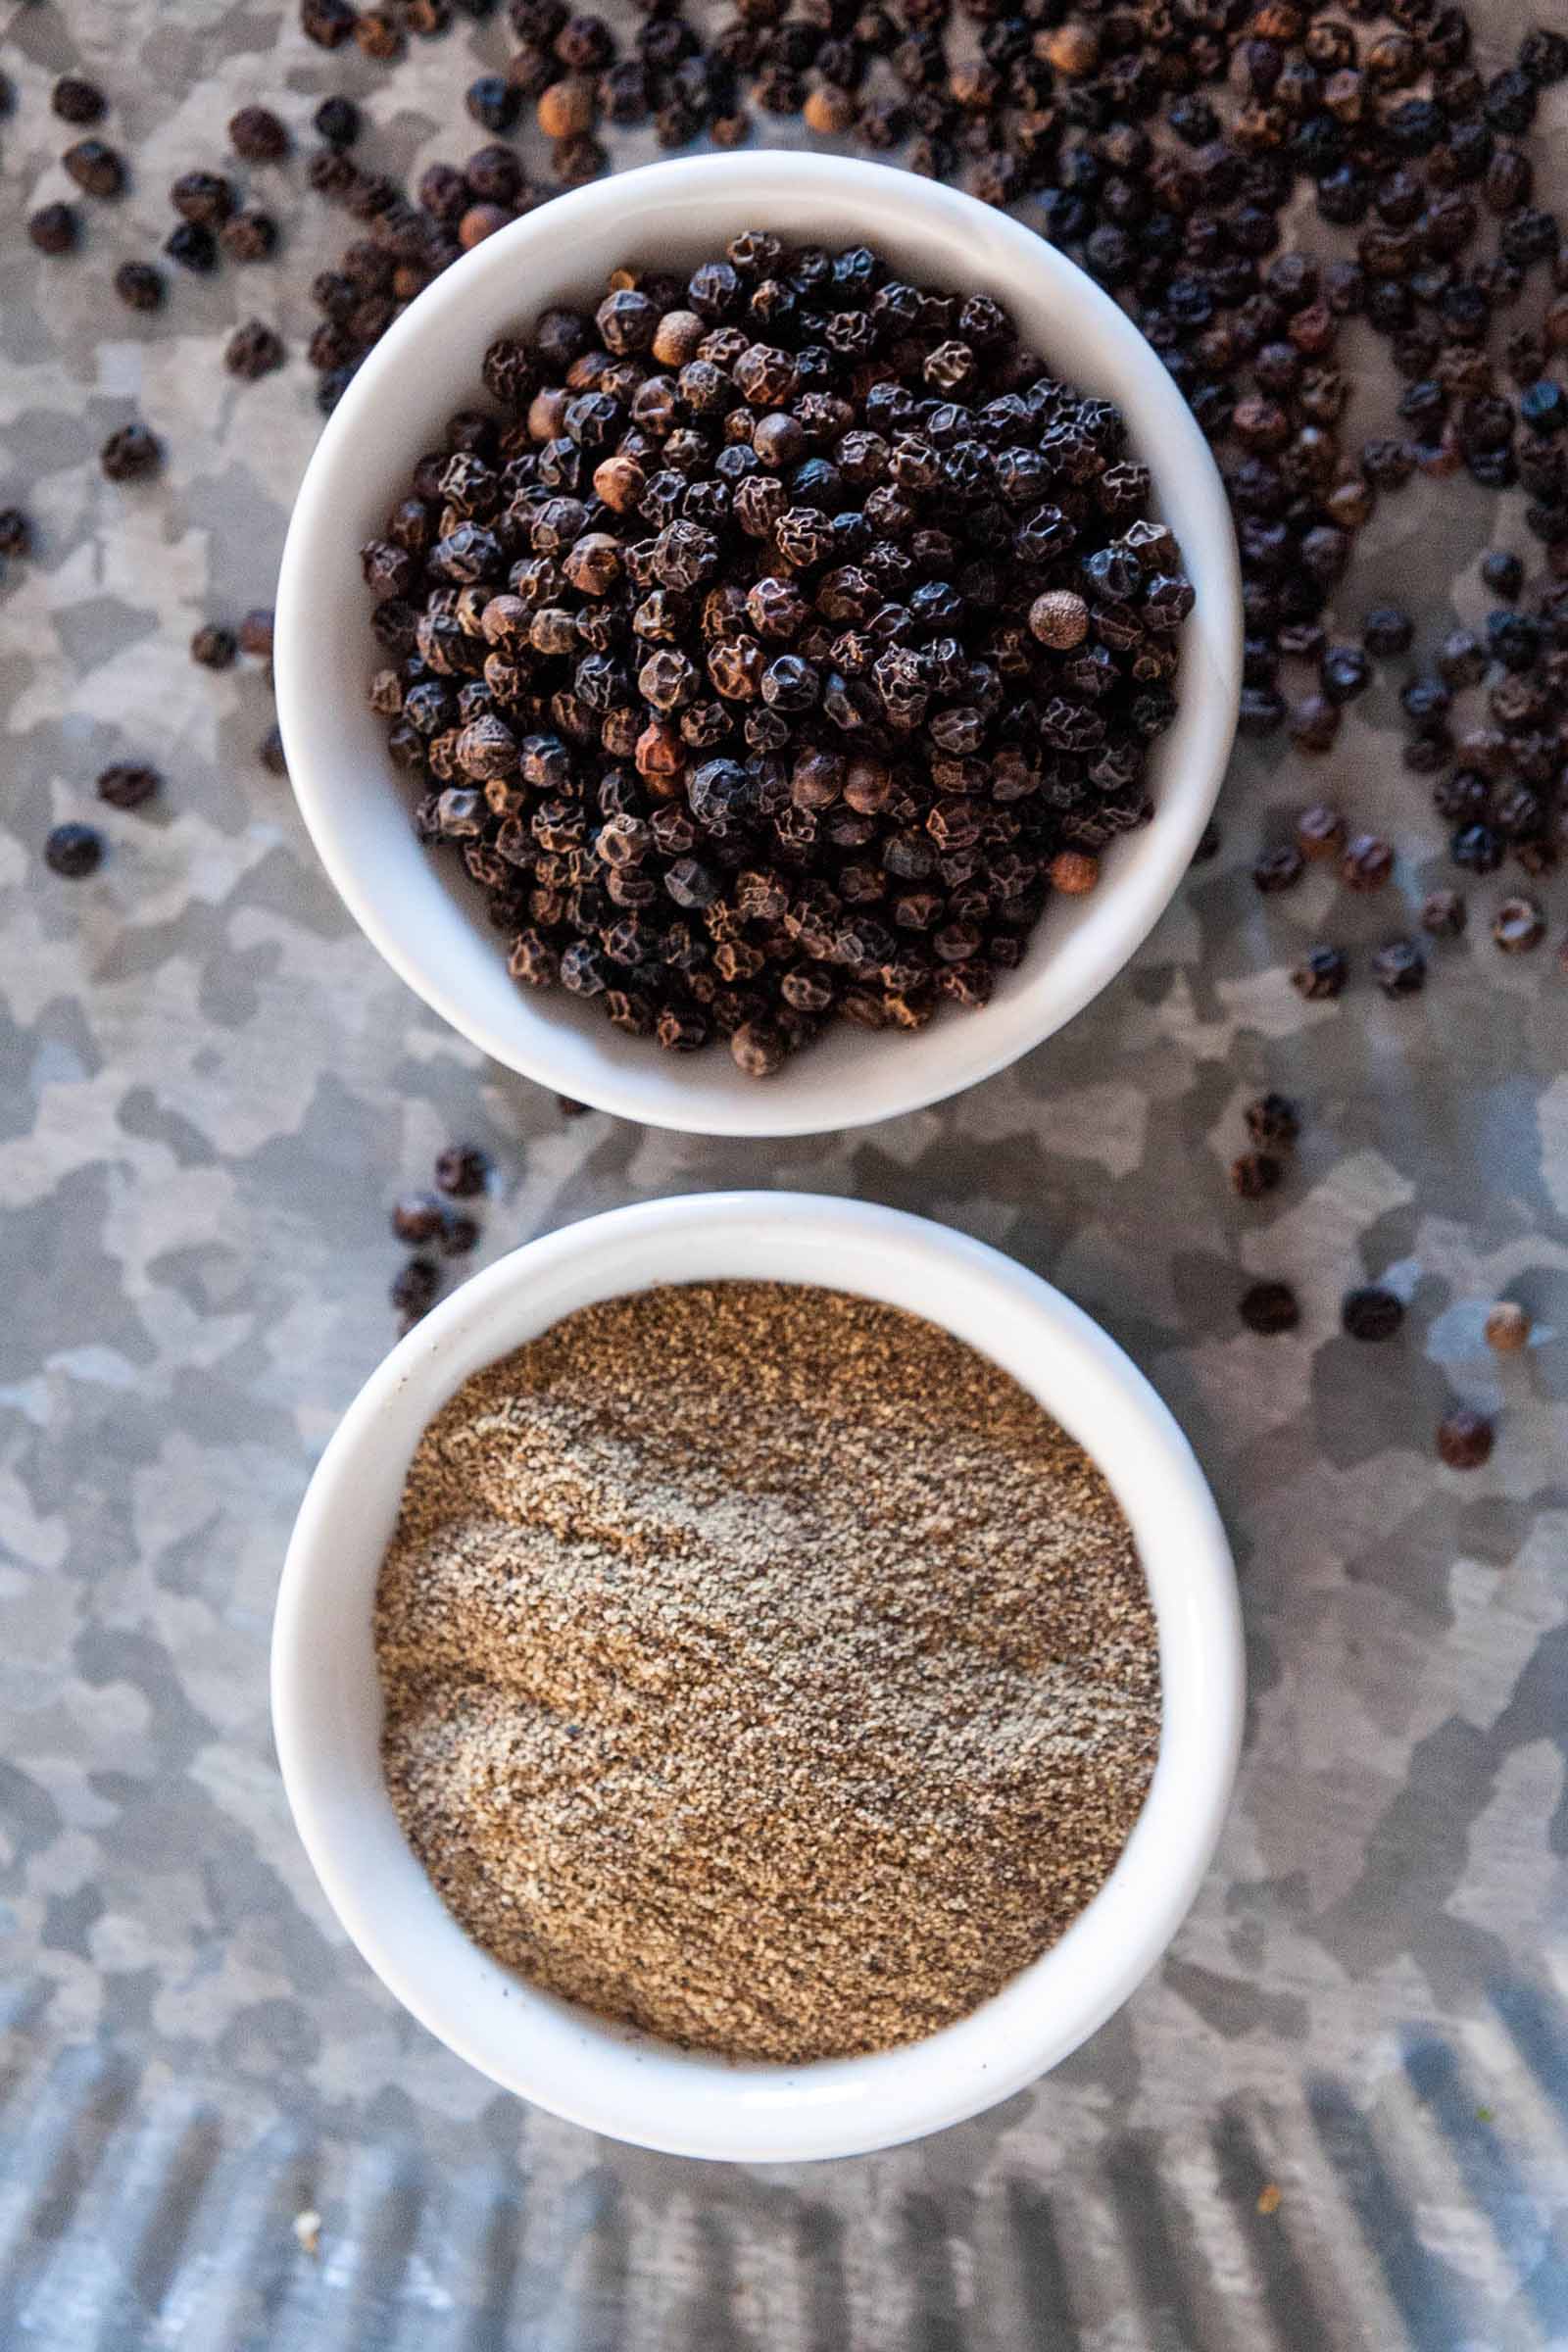 Ground pepper and whole peppercorns